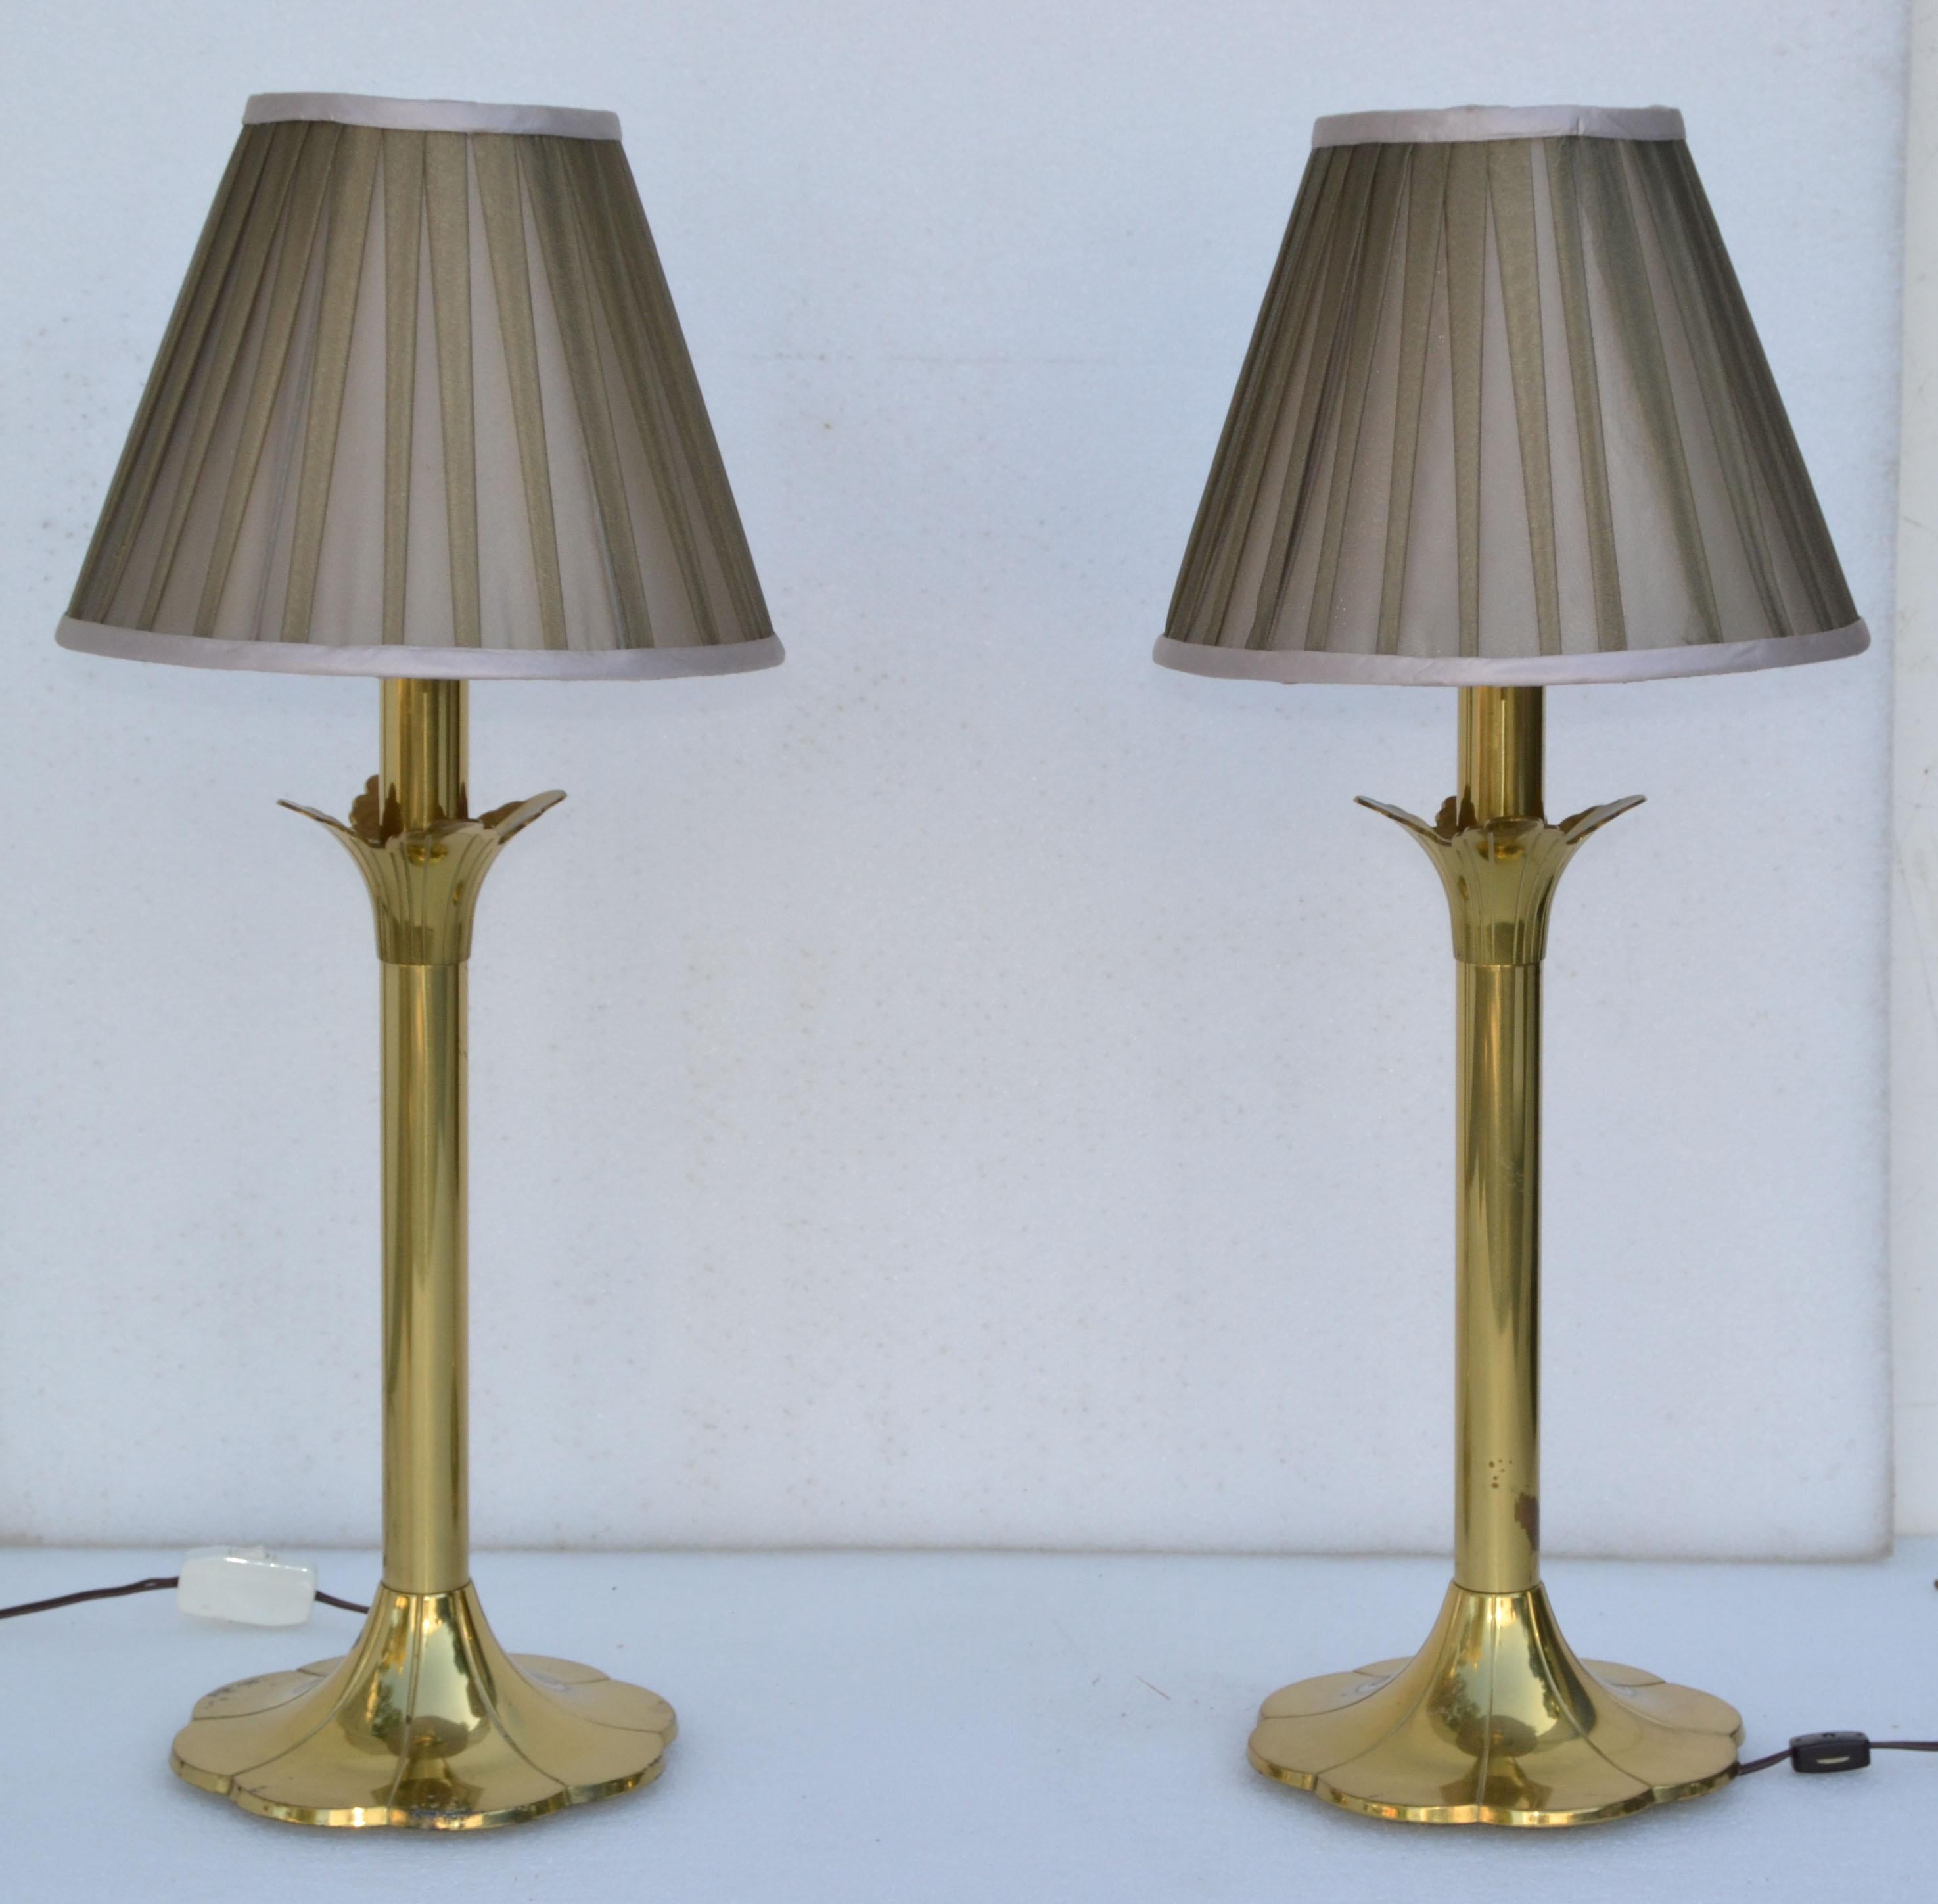 Pair of Stiffel Brass Table Lamps & Shades Mid-Century Modern American 1990 For Sale 7